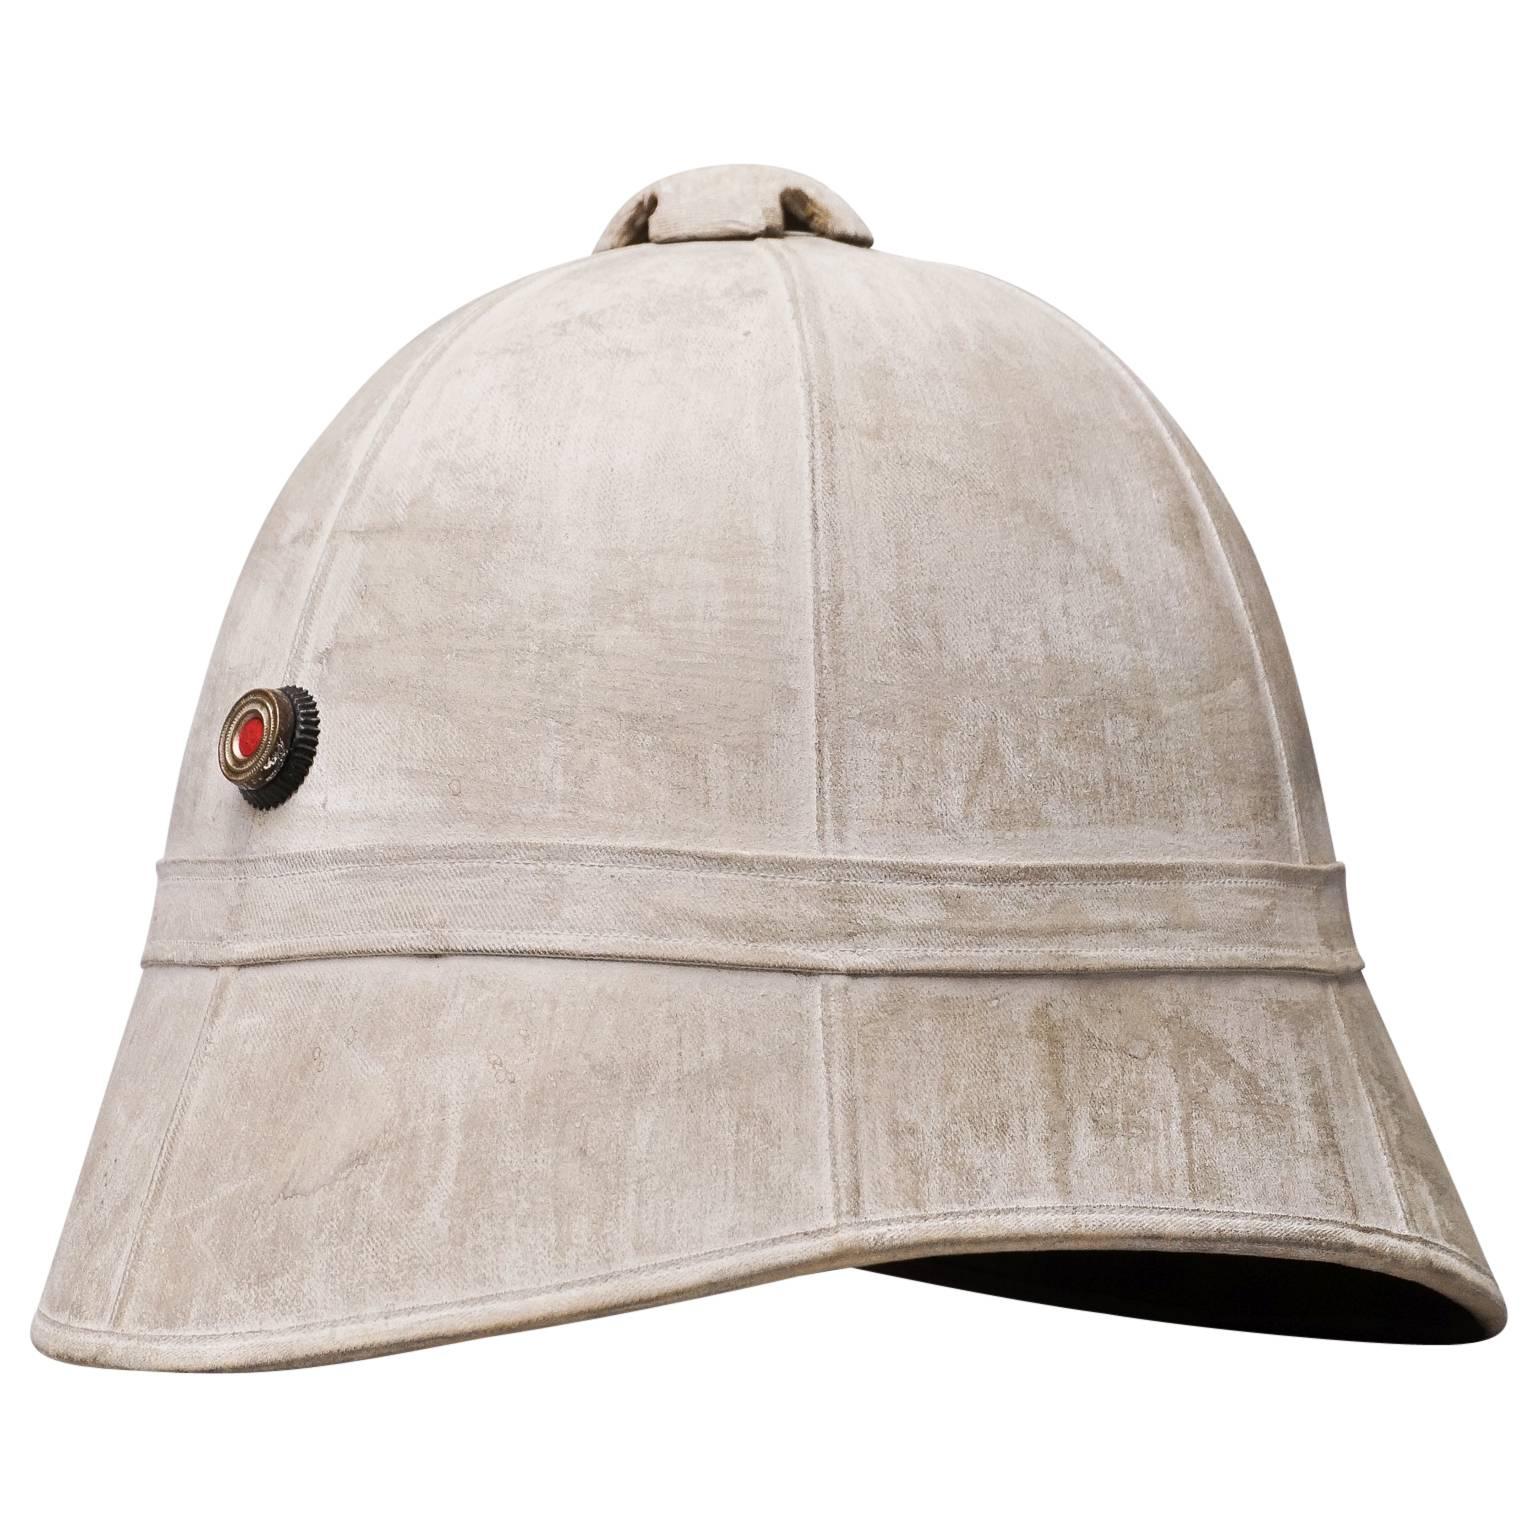 Rare 19th century Pith or Tropical Officers Helmet